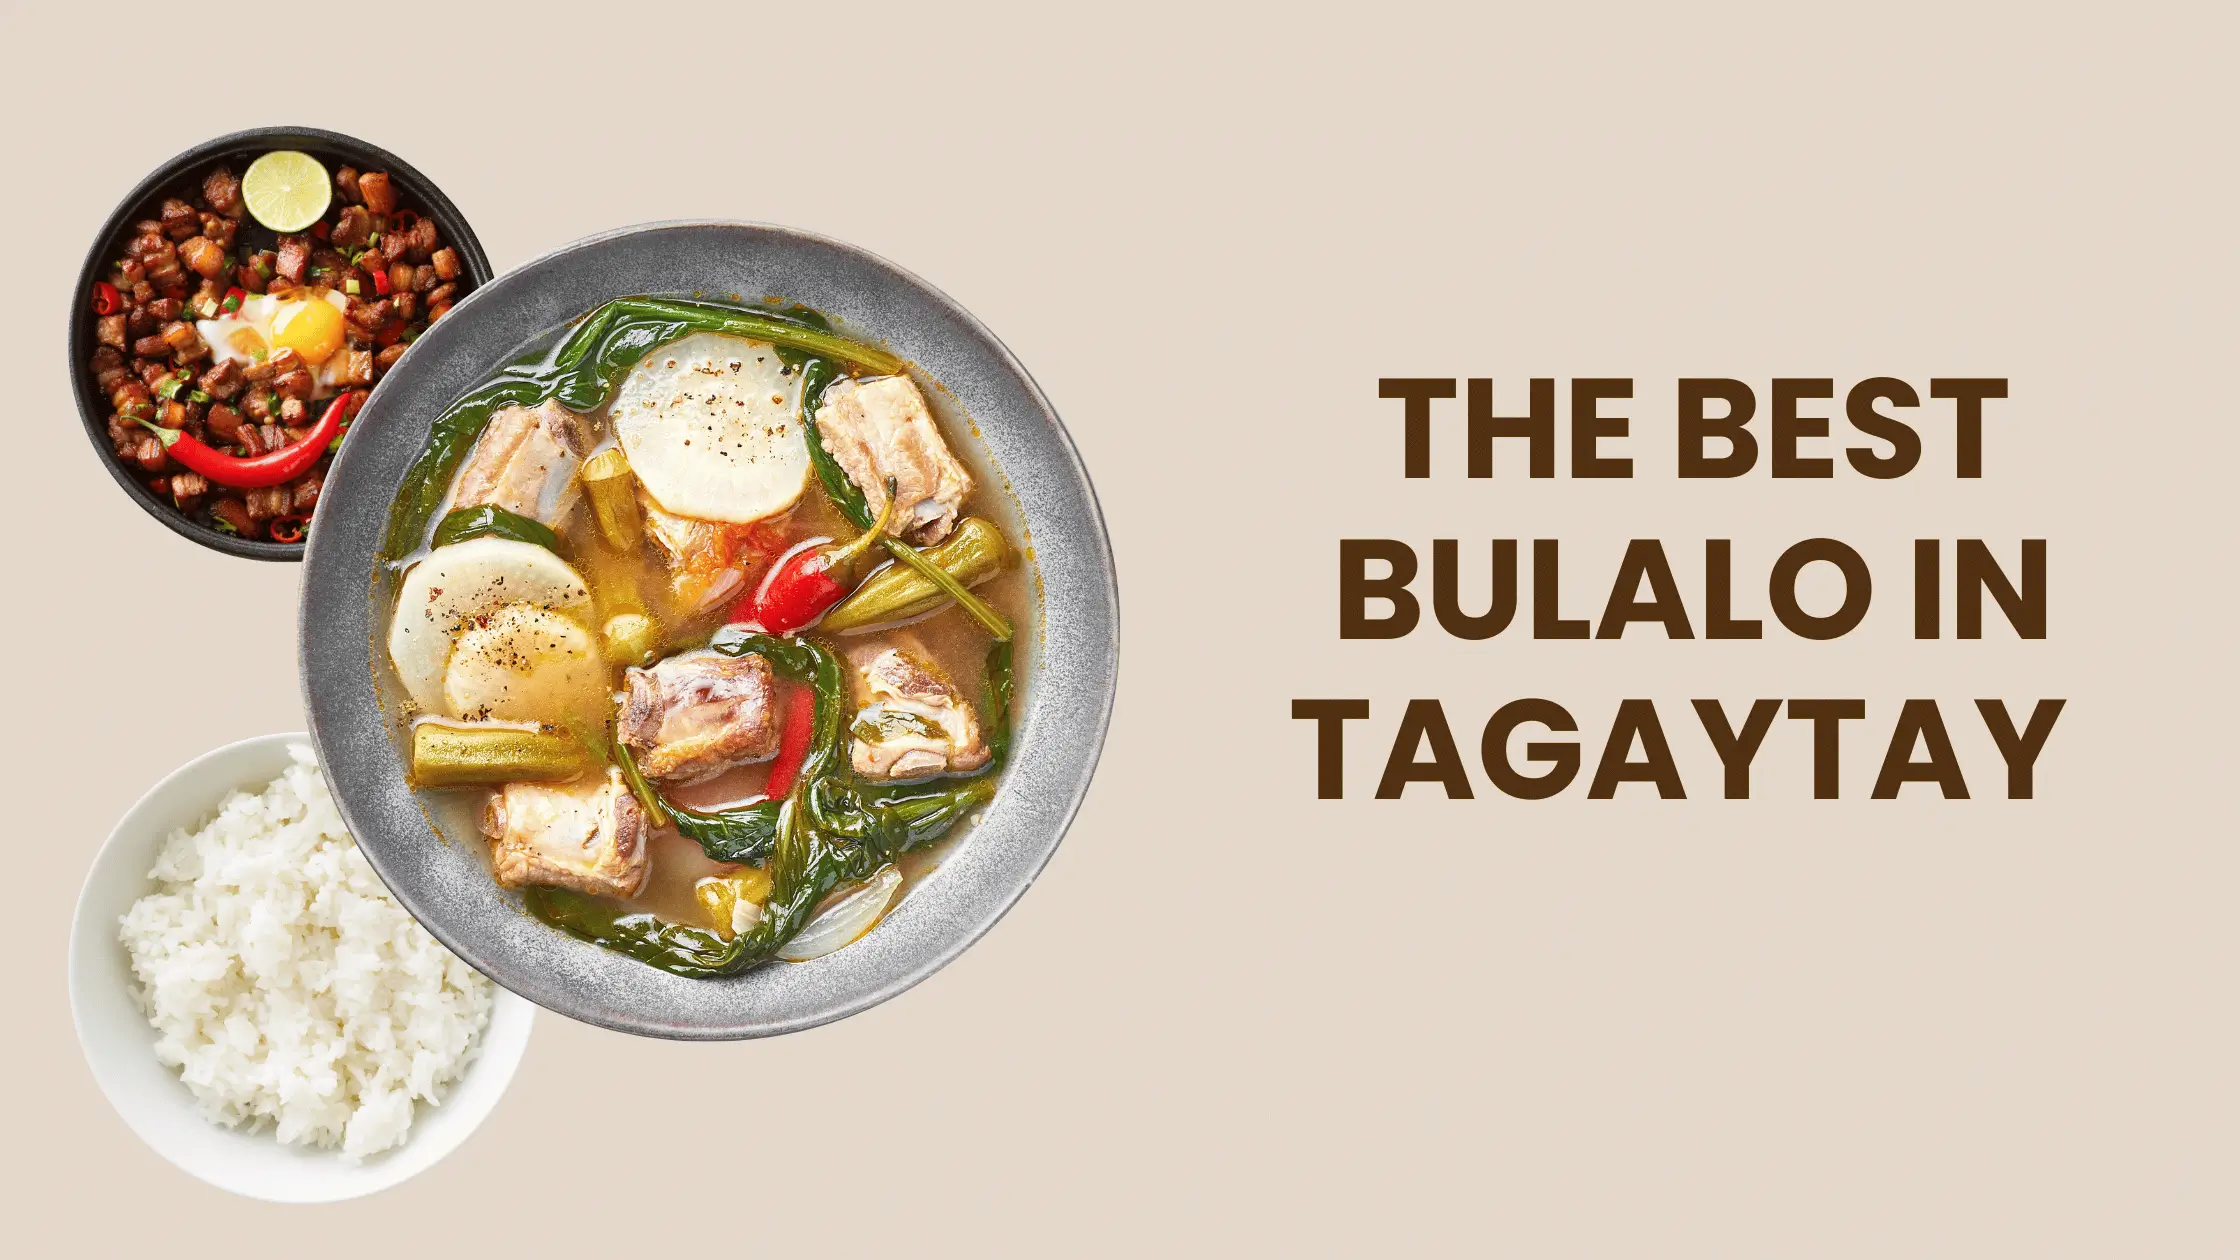 Best Bulalo in Tagaytay - Let's Travel Philippines